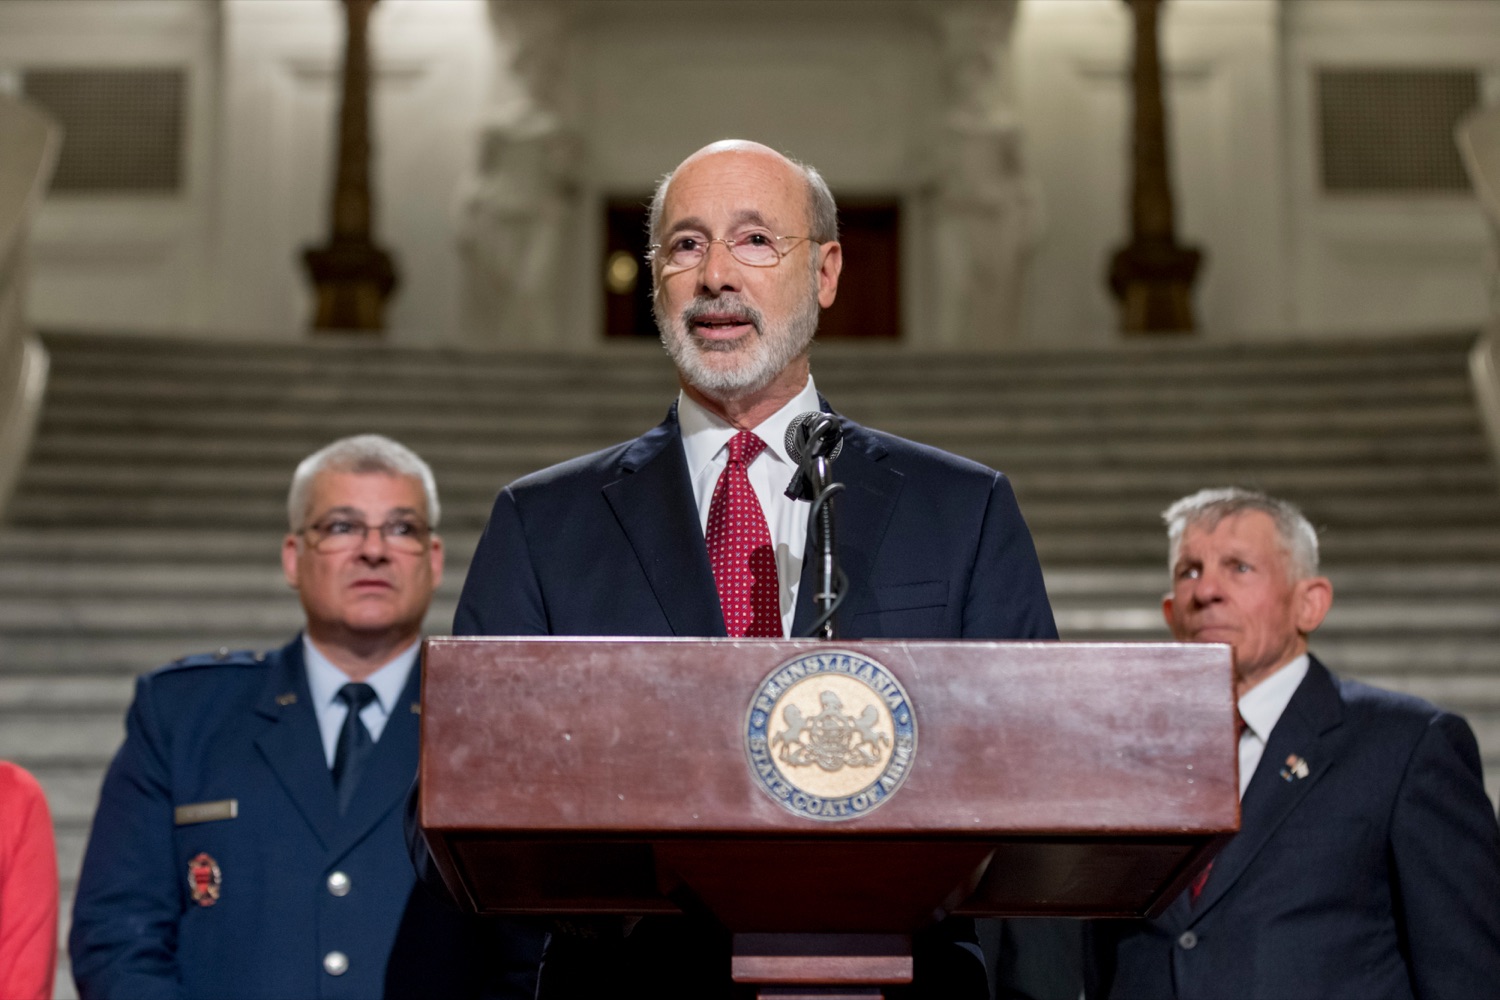 Pennsylvania Governor Tom Wolf speaks during a press conference outlining how competition for qualified individuals among all employment sectors affects military recruiting efforts and warrants greater investment in our next generation inside the Capitol Rotunda on Tuesday, November 12, 2019.<br><a href="https://filesource.amperwave.net/commonwealthofpa/photo/17588_GOV_Mission_Readiness_NK_018.JPG" target="_blank">⇣ Download Photo</a>